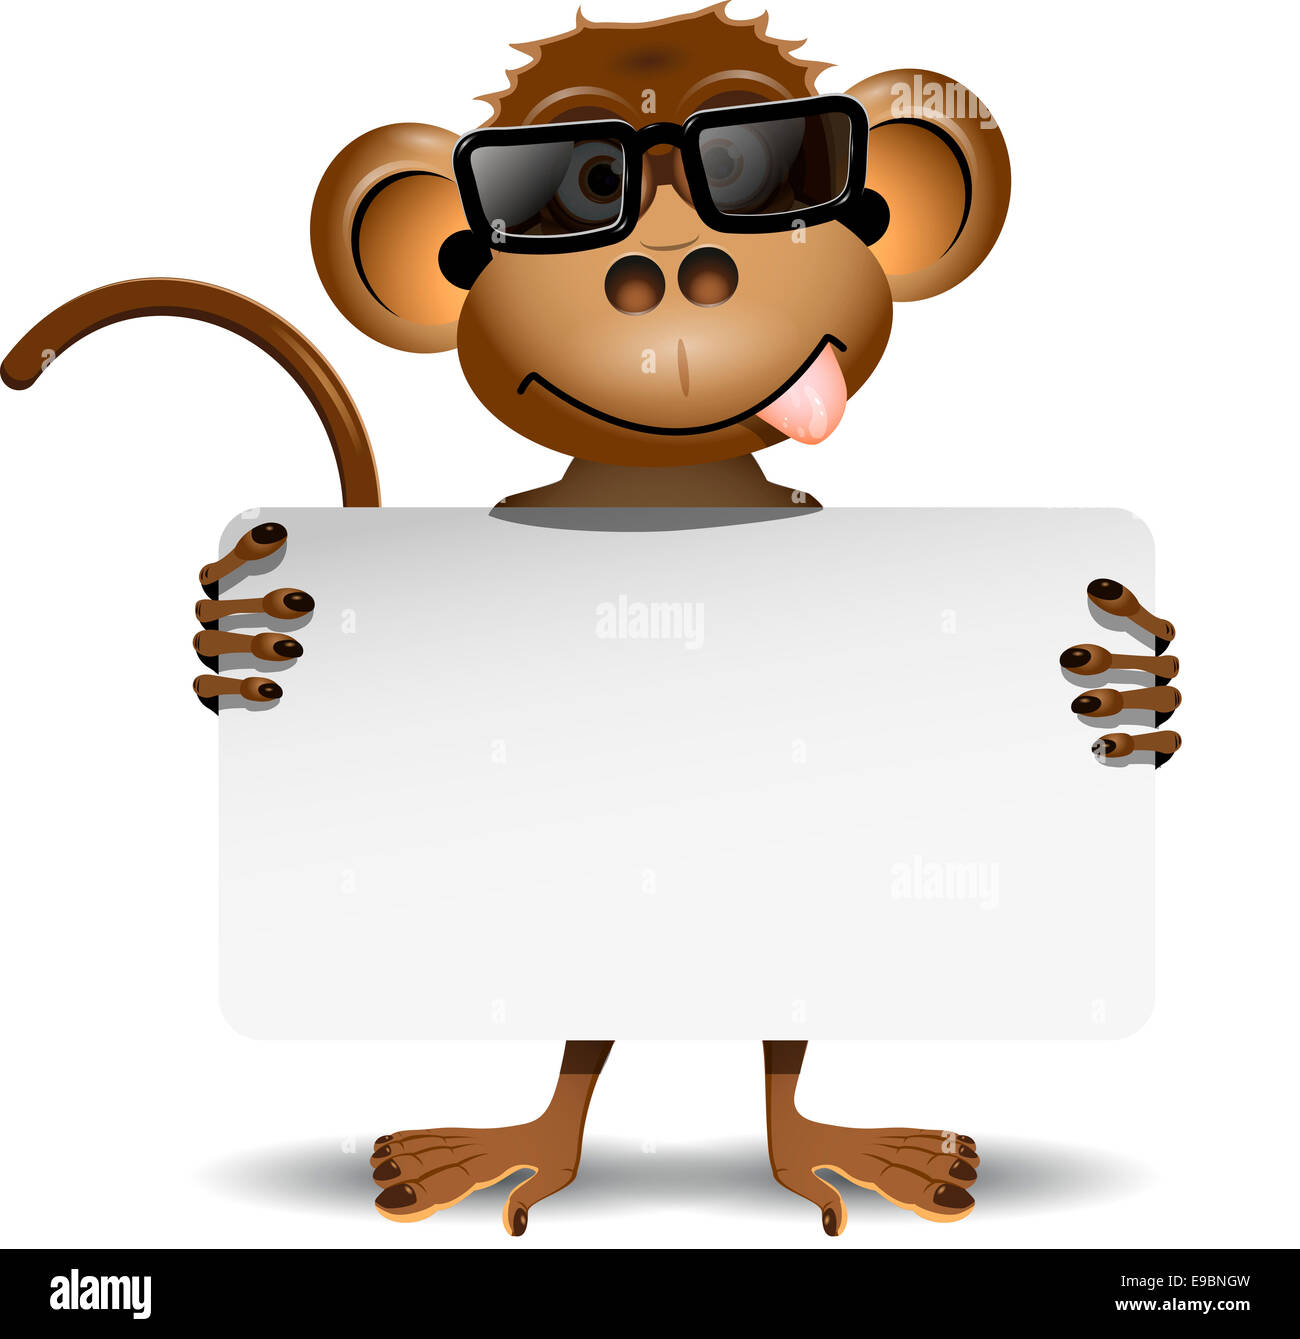 Monkey With Sunglasses High Resolution Stock Photography and Images - Alamy